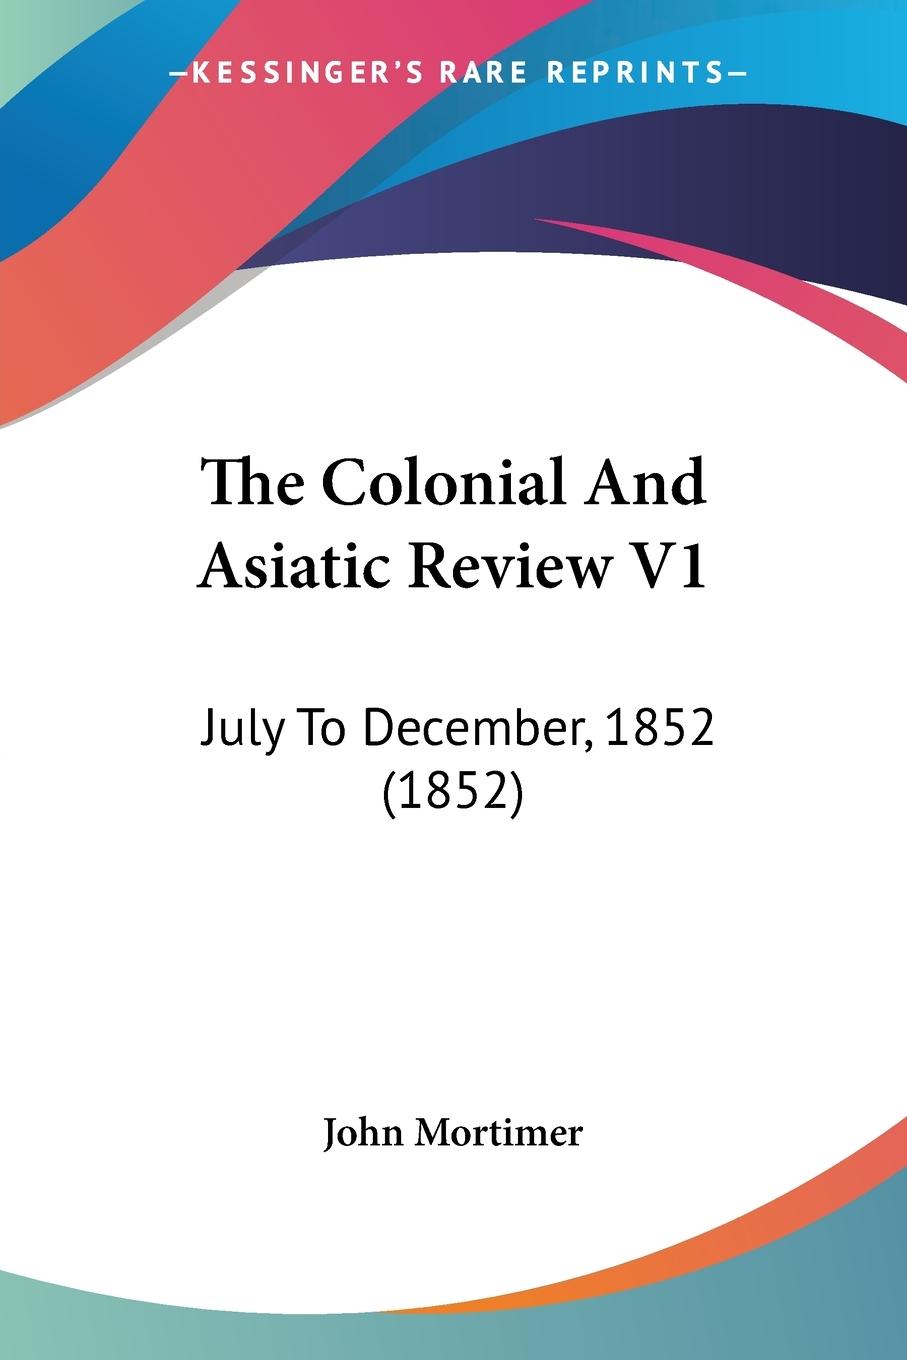 The Colonial And Asiatic Review V1 - John Mortimer